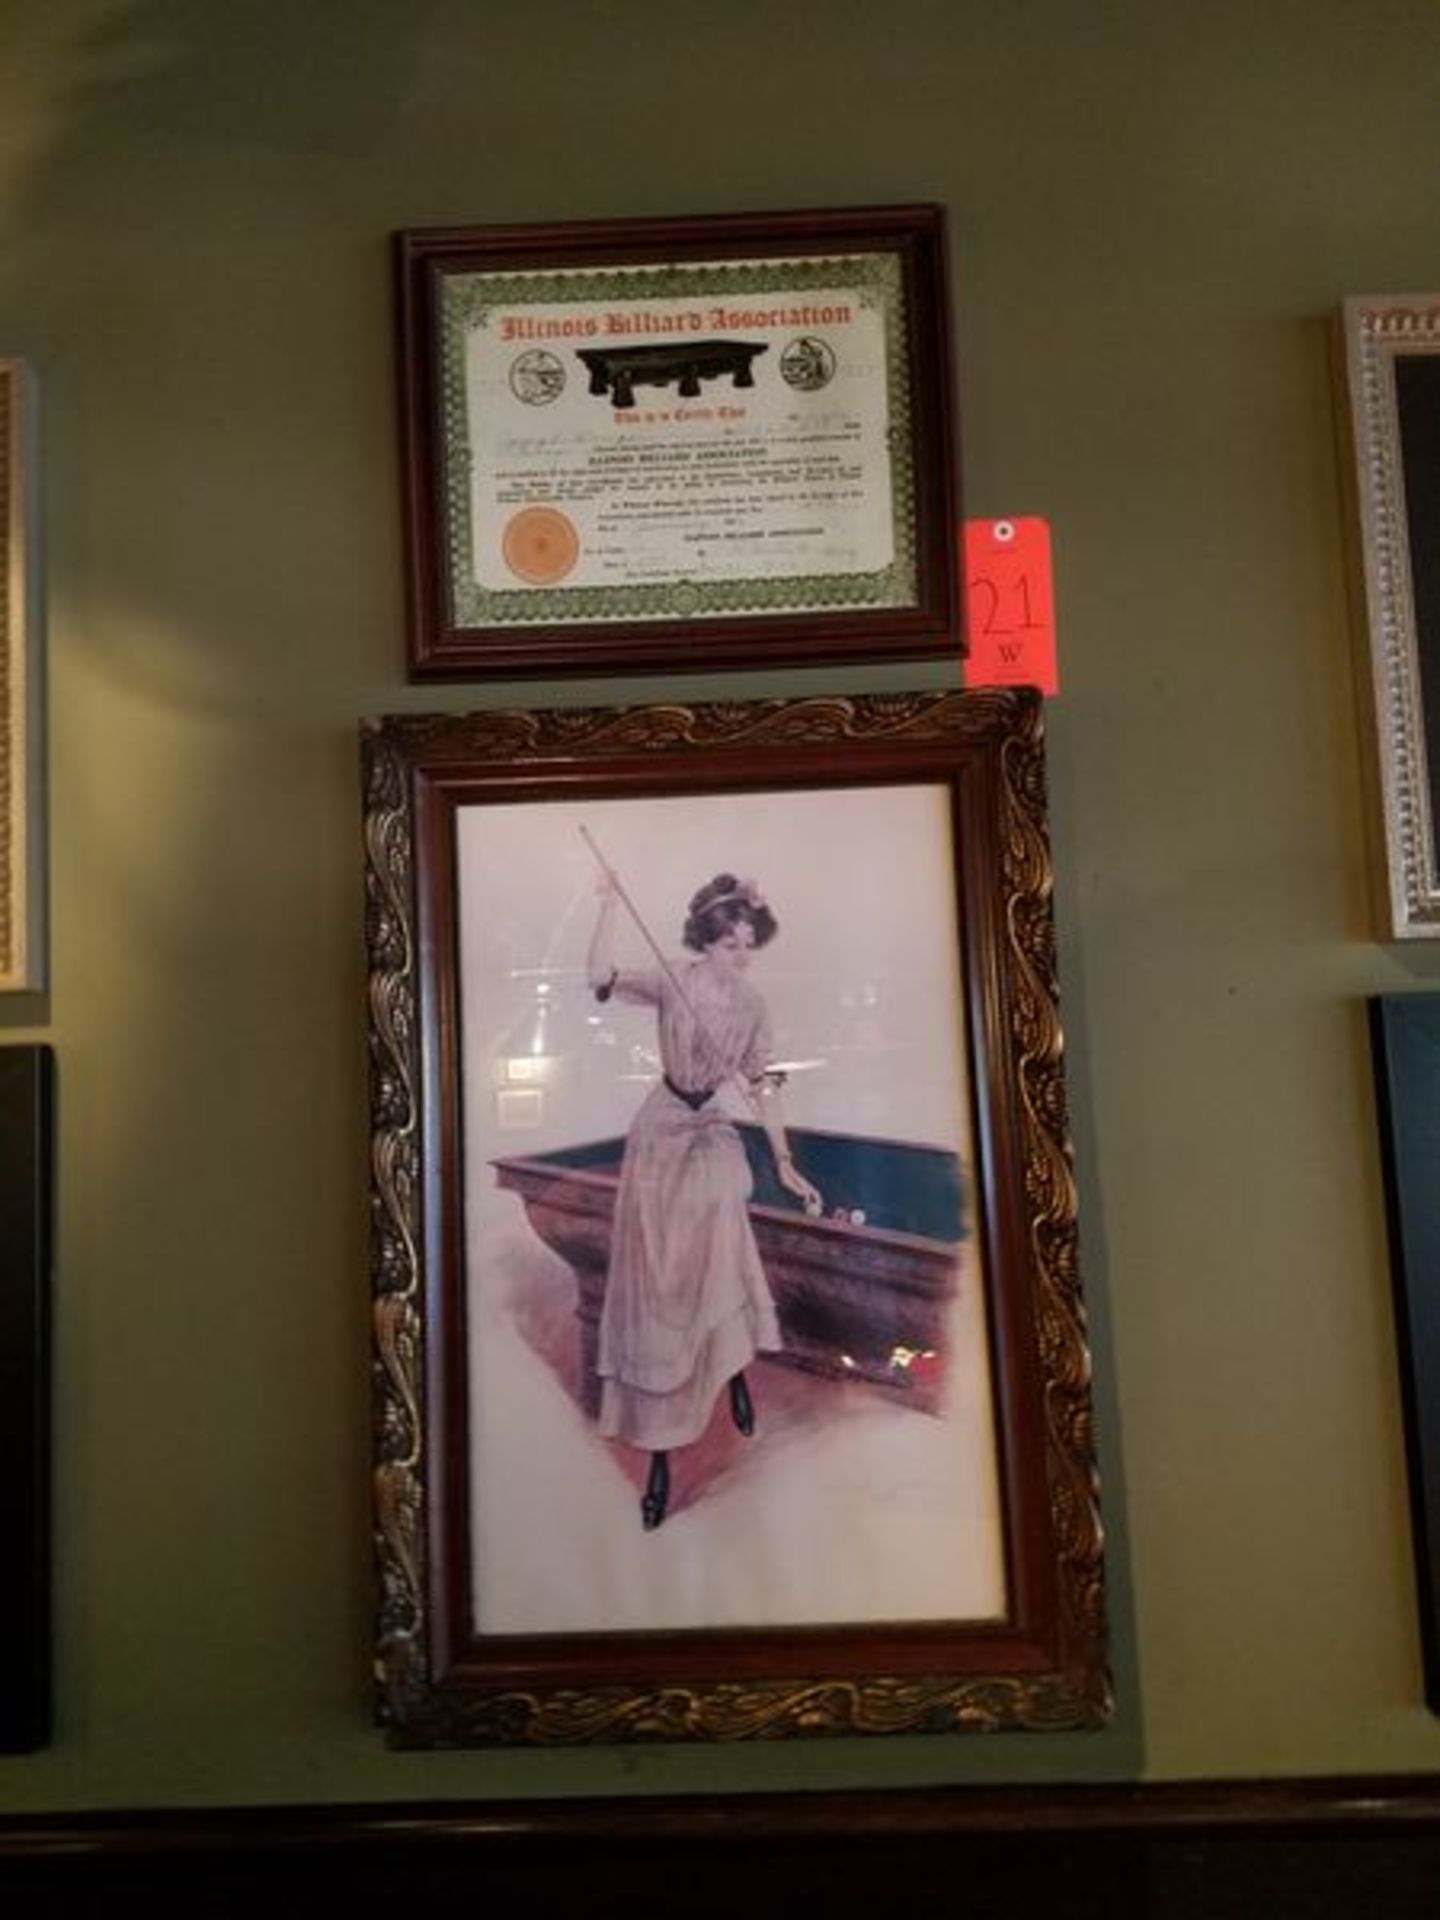 Lot - (1) Drawing of Female Billiard Player, and (1) Certificate from the Illinois Billiard